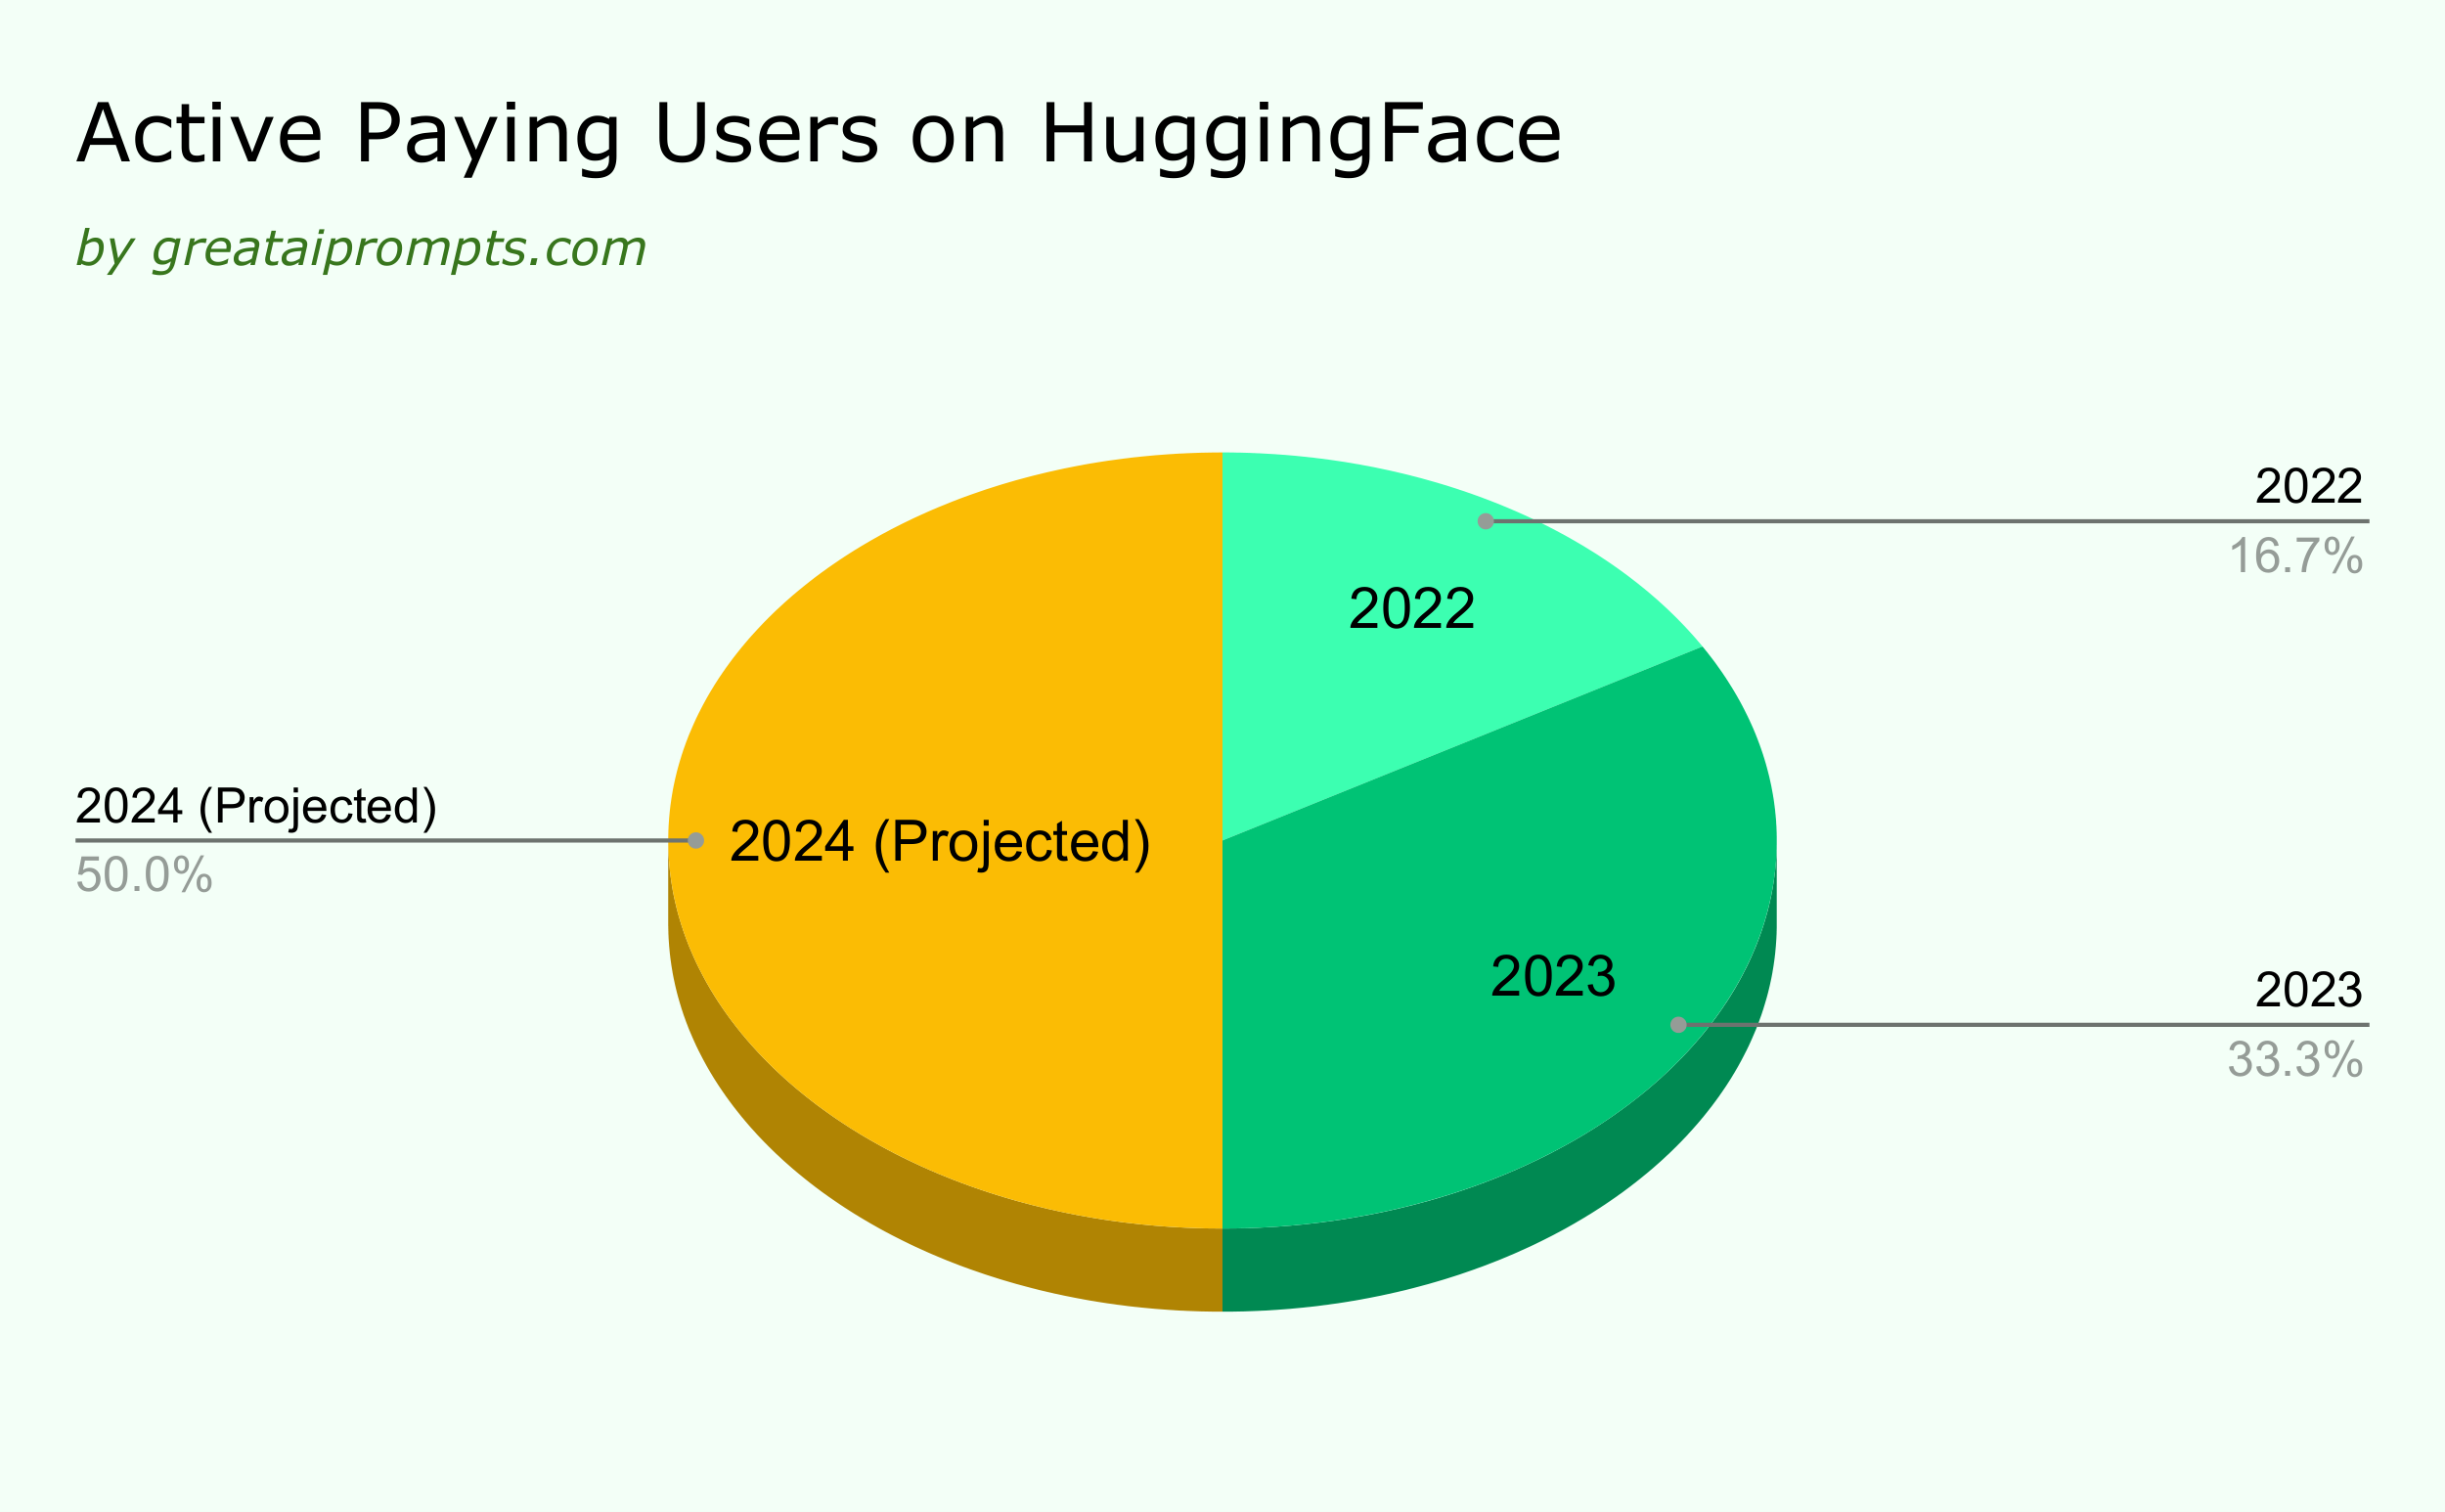 Active Paying Users on HuggingFace